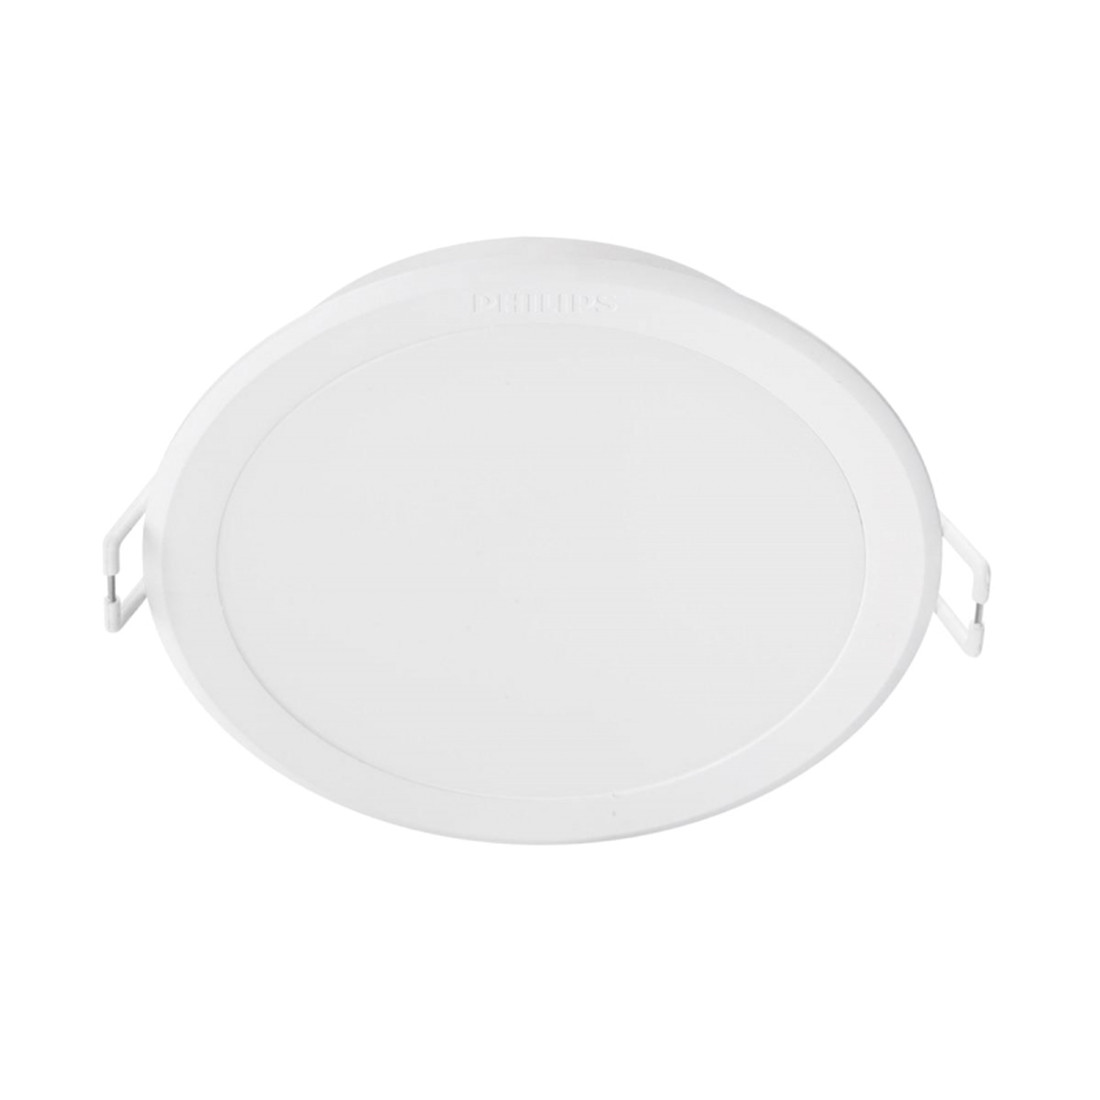 Светильник Philips 59466 MESON 150 17W 40K WH recessed LED 2-014562 915005748701